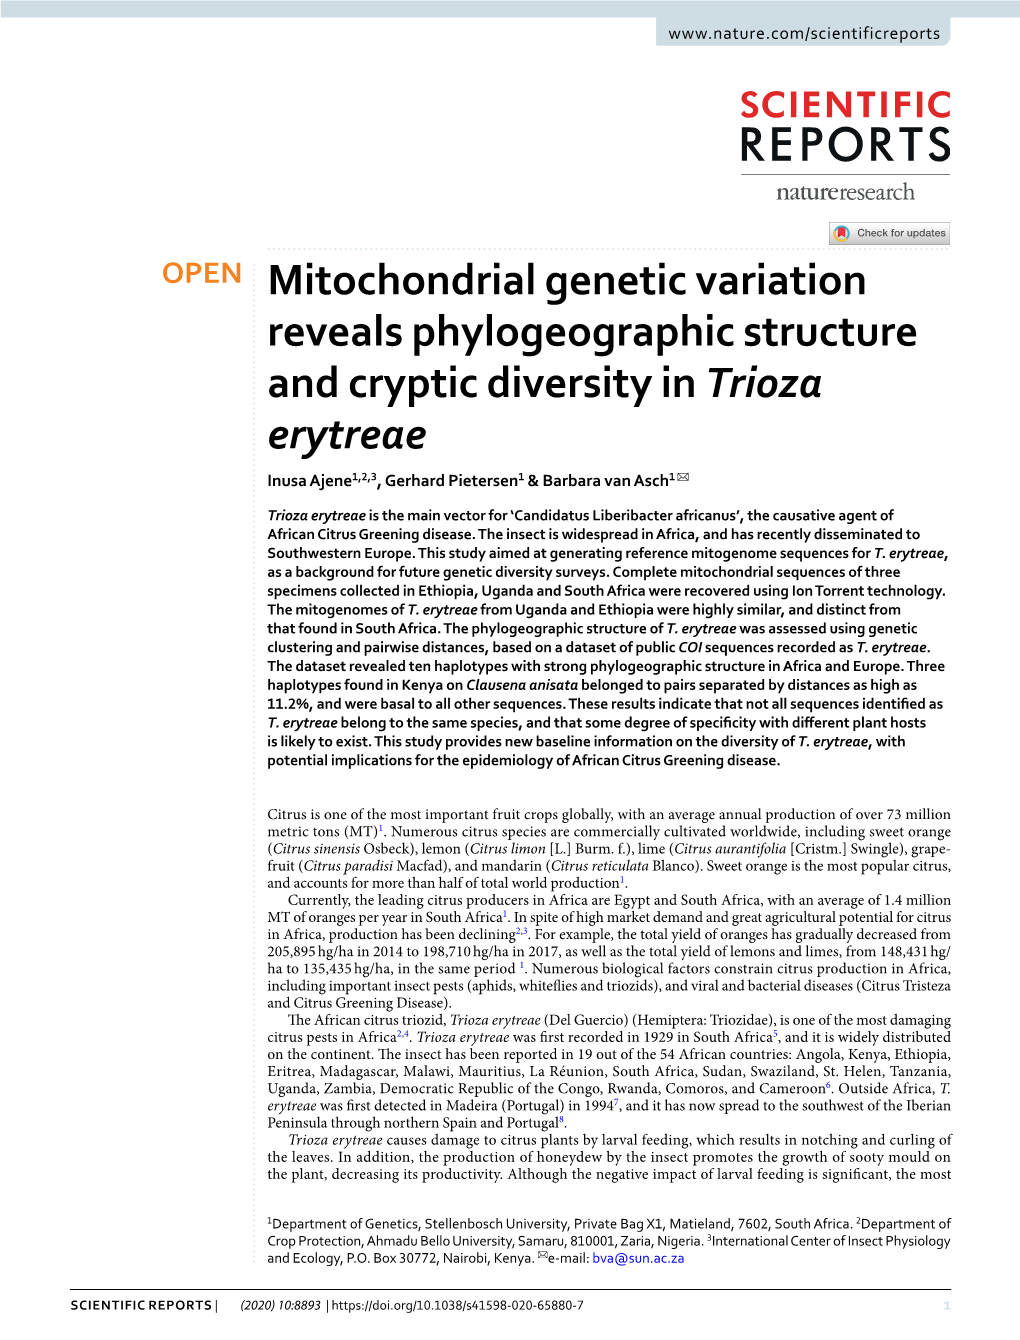 Mitochondrial Genetic Variation Reveals Phylogeographic Structure and Cryptic Diversity in Trioza Erytreae Inusa Ajene1,2,3, Gerhard Pietersen1 & Barbara Van Asch1 ✉